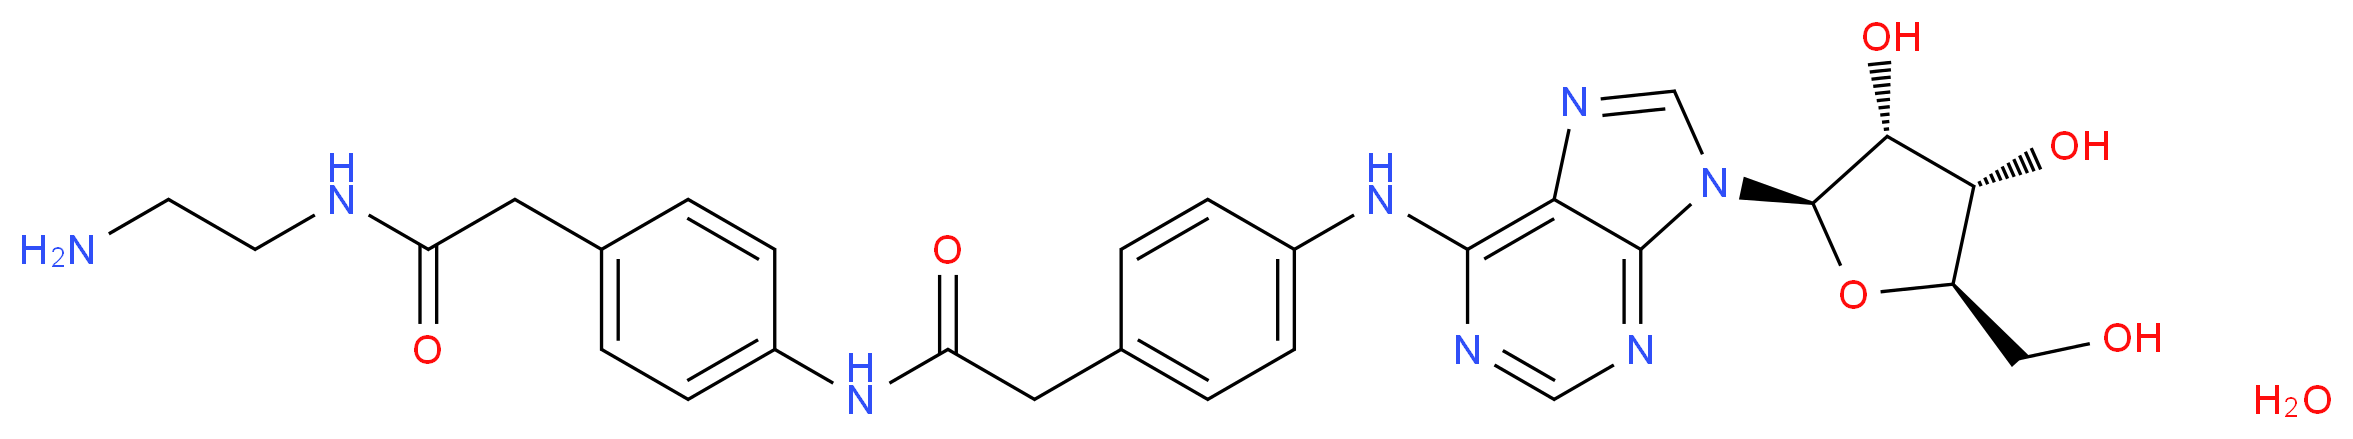 96760-69-9(anhydrous) molecular structure